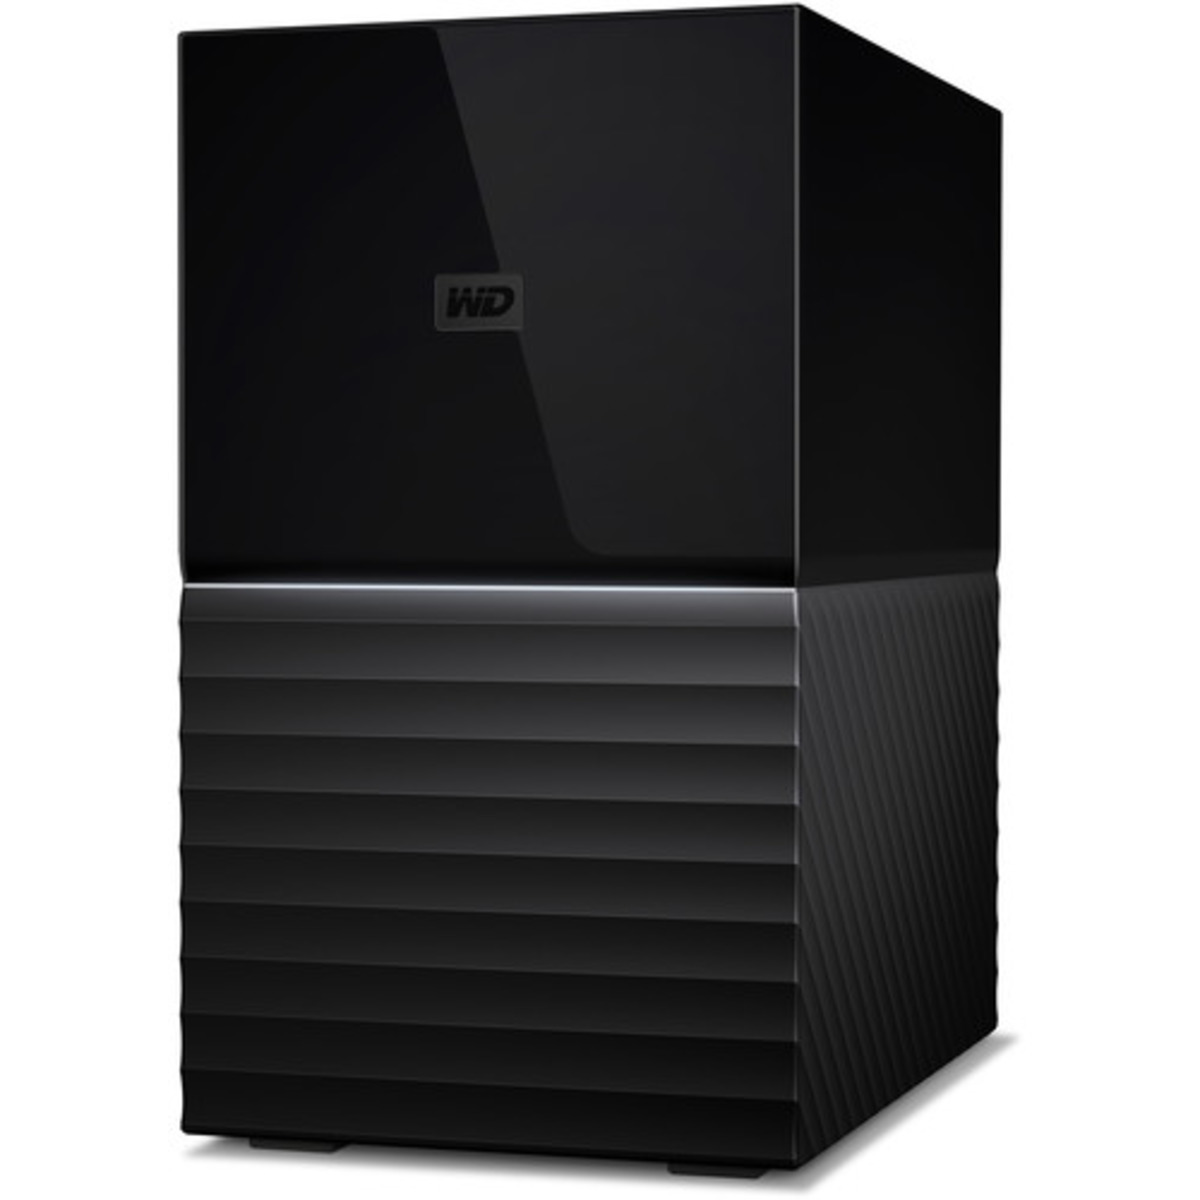 Western Digital My Book DUO Gen 2 8tb 2-Bay Desktop Personal / Basic Home / Small Office DAS - Direct Attached Storage Device 2x4tb Western Digital Red Plus WD40EFPX 3.5 5400rpm SATA 6Gb/s HDD NAS Class Drives Installed - Burn-In Tested - ON SALE My Book DUO Gen 2